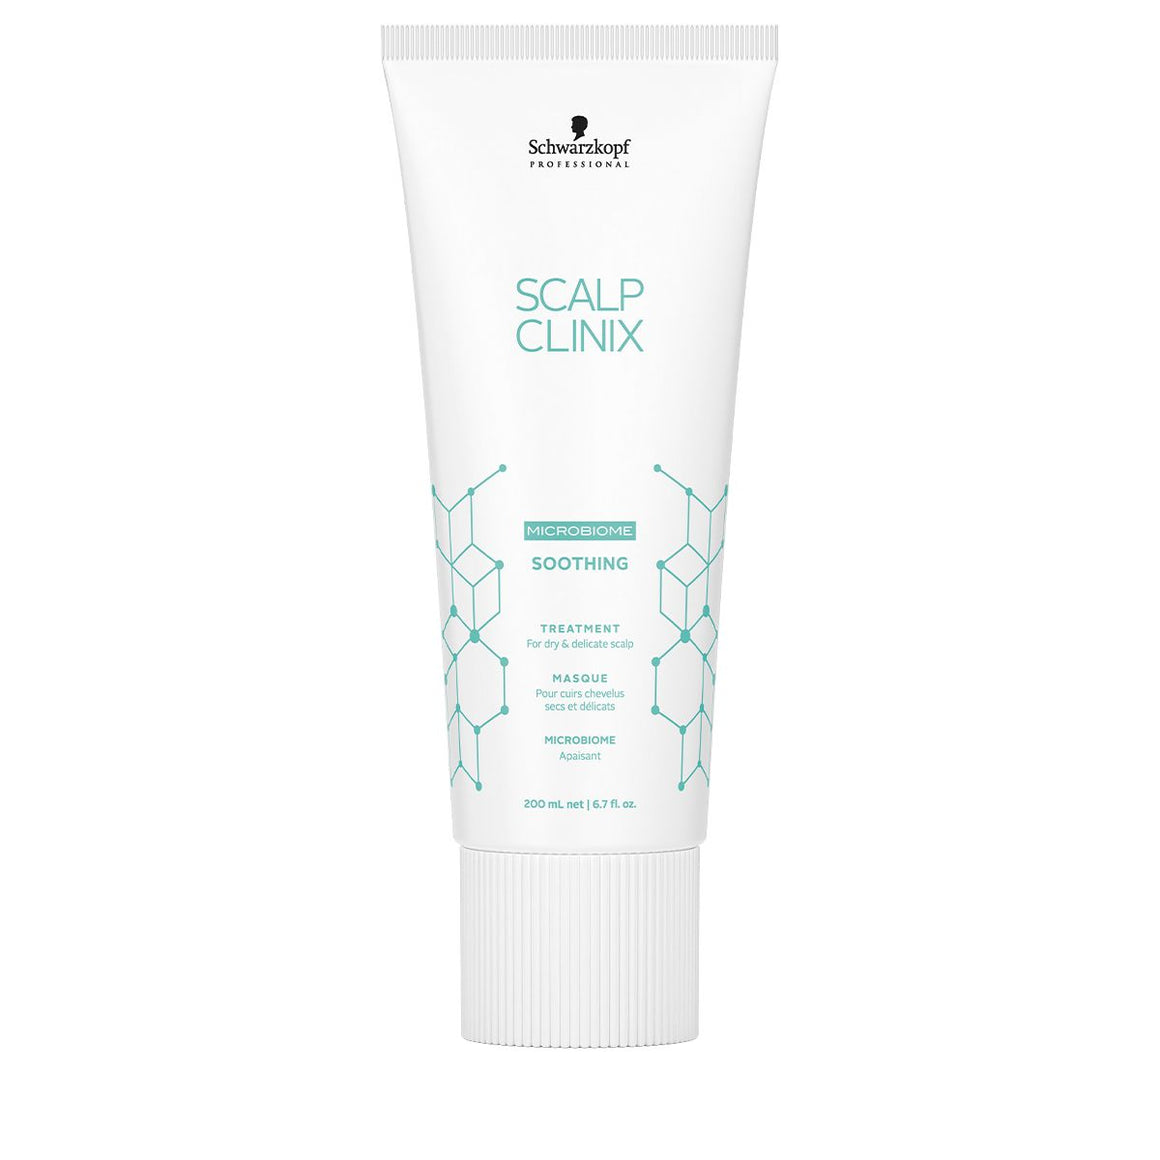 Schwarzkopf Professional Scalp Clinix Microbiome Soothing Treatment at Eds Hair Bramhall